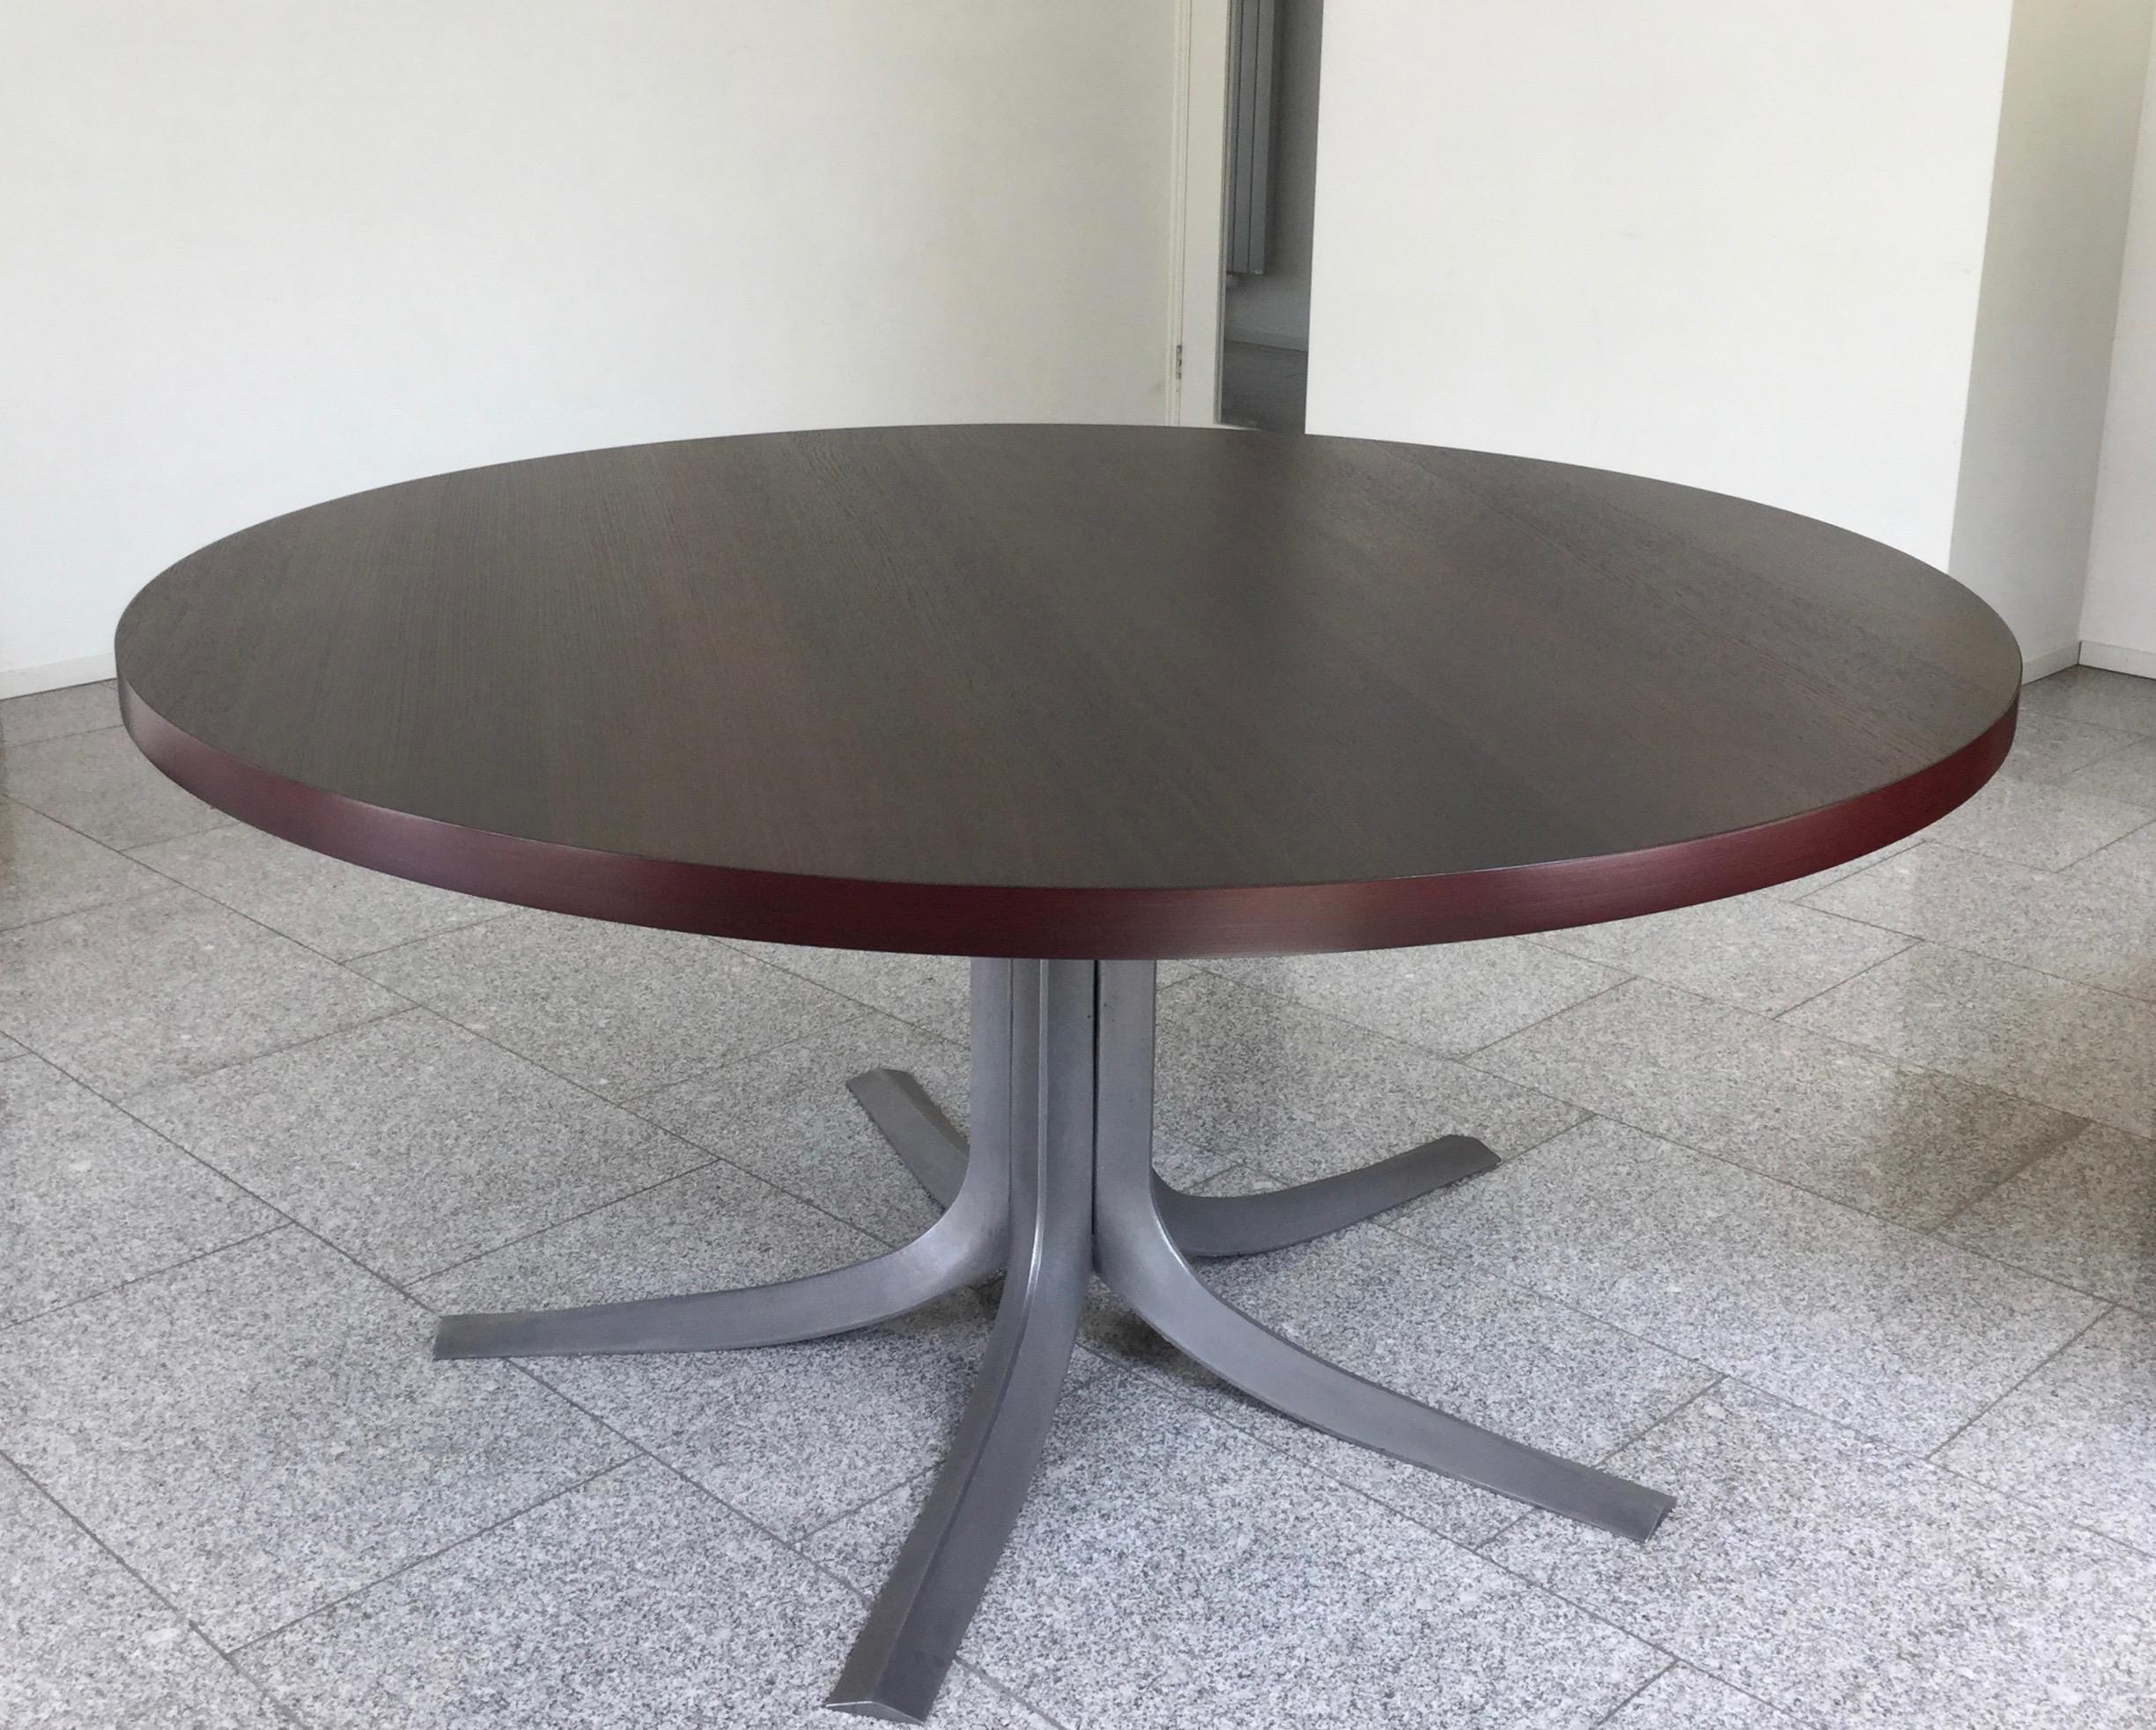 Pan Coupé table is one of the most fundamental creations of Jules Wabbes, a Belgian design icon in the 1950s thru the 1970s. The thick tabletop of veneered smoked oak is supported by the organic and graceful base of anodized cast aluminum. The